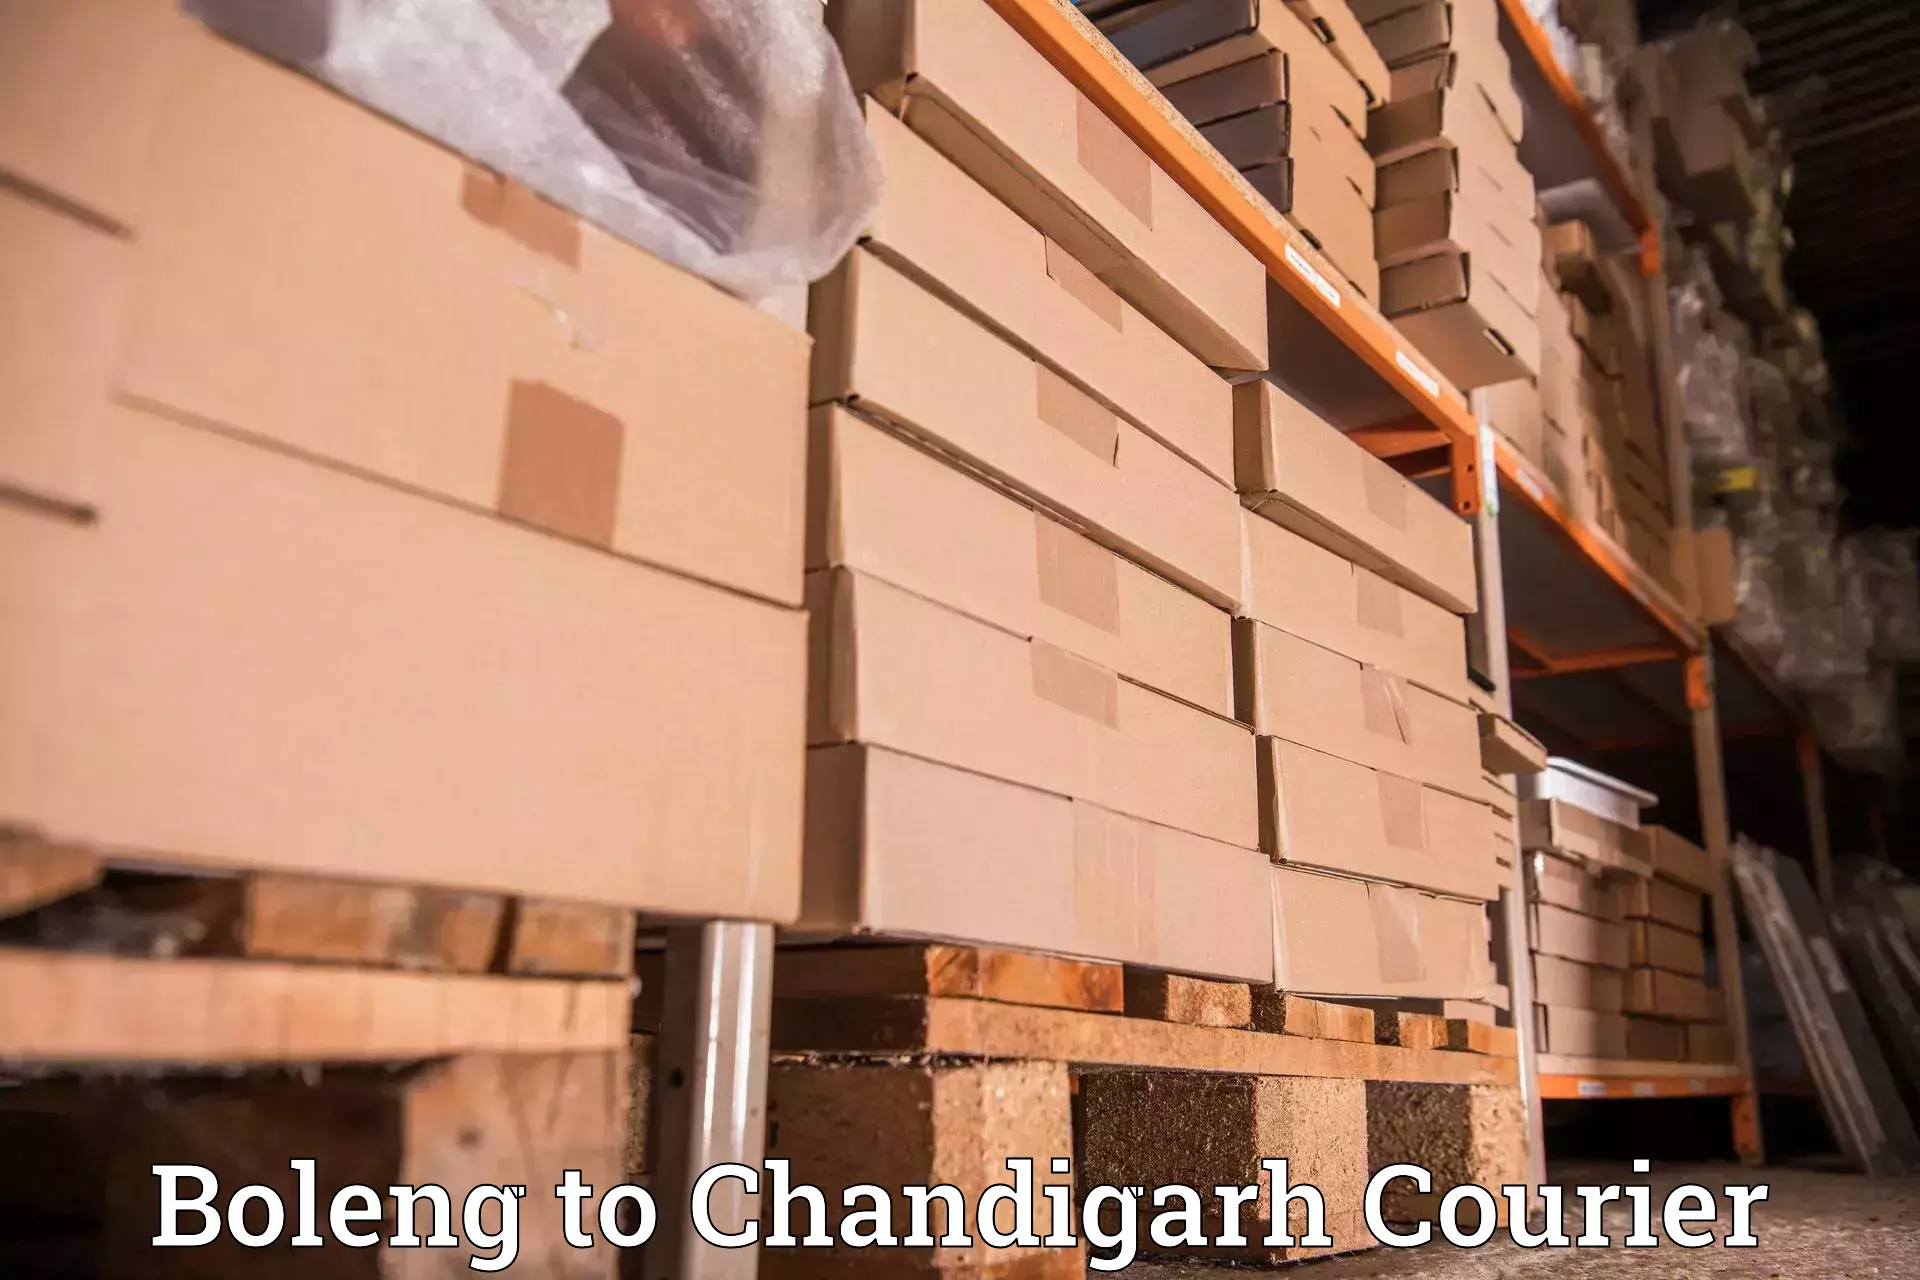 End-to-end delivery Boleng to Chandigarh